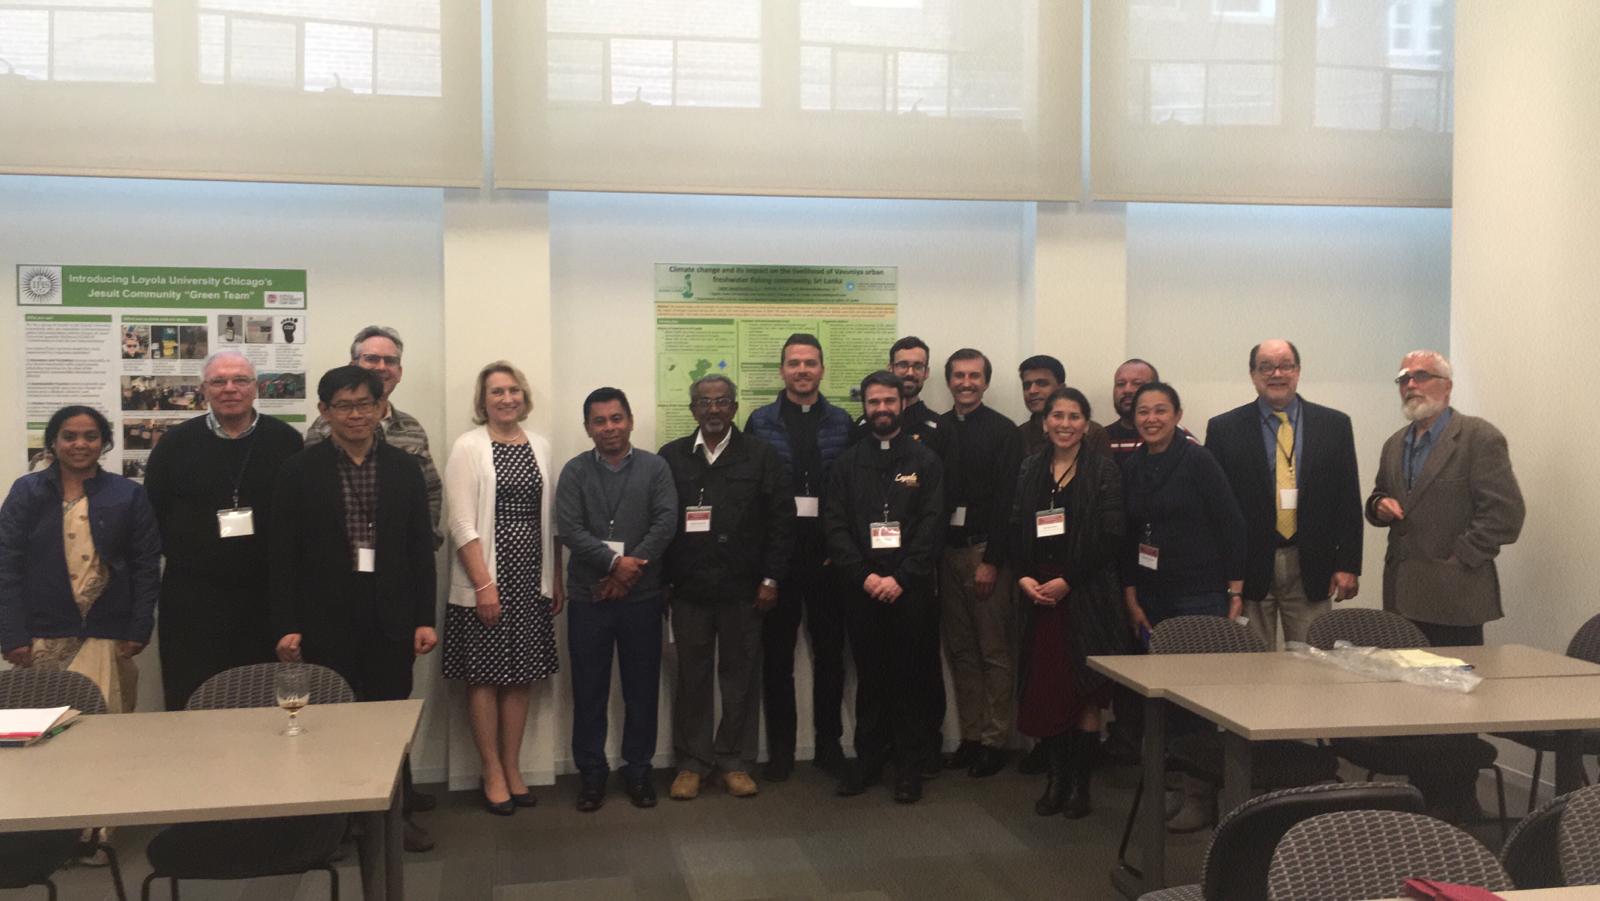 Selected Participants at the Community-Based Research in Environmental Justice Workshop in Chicago 